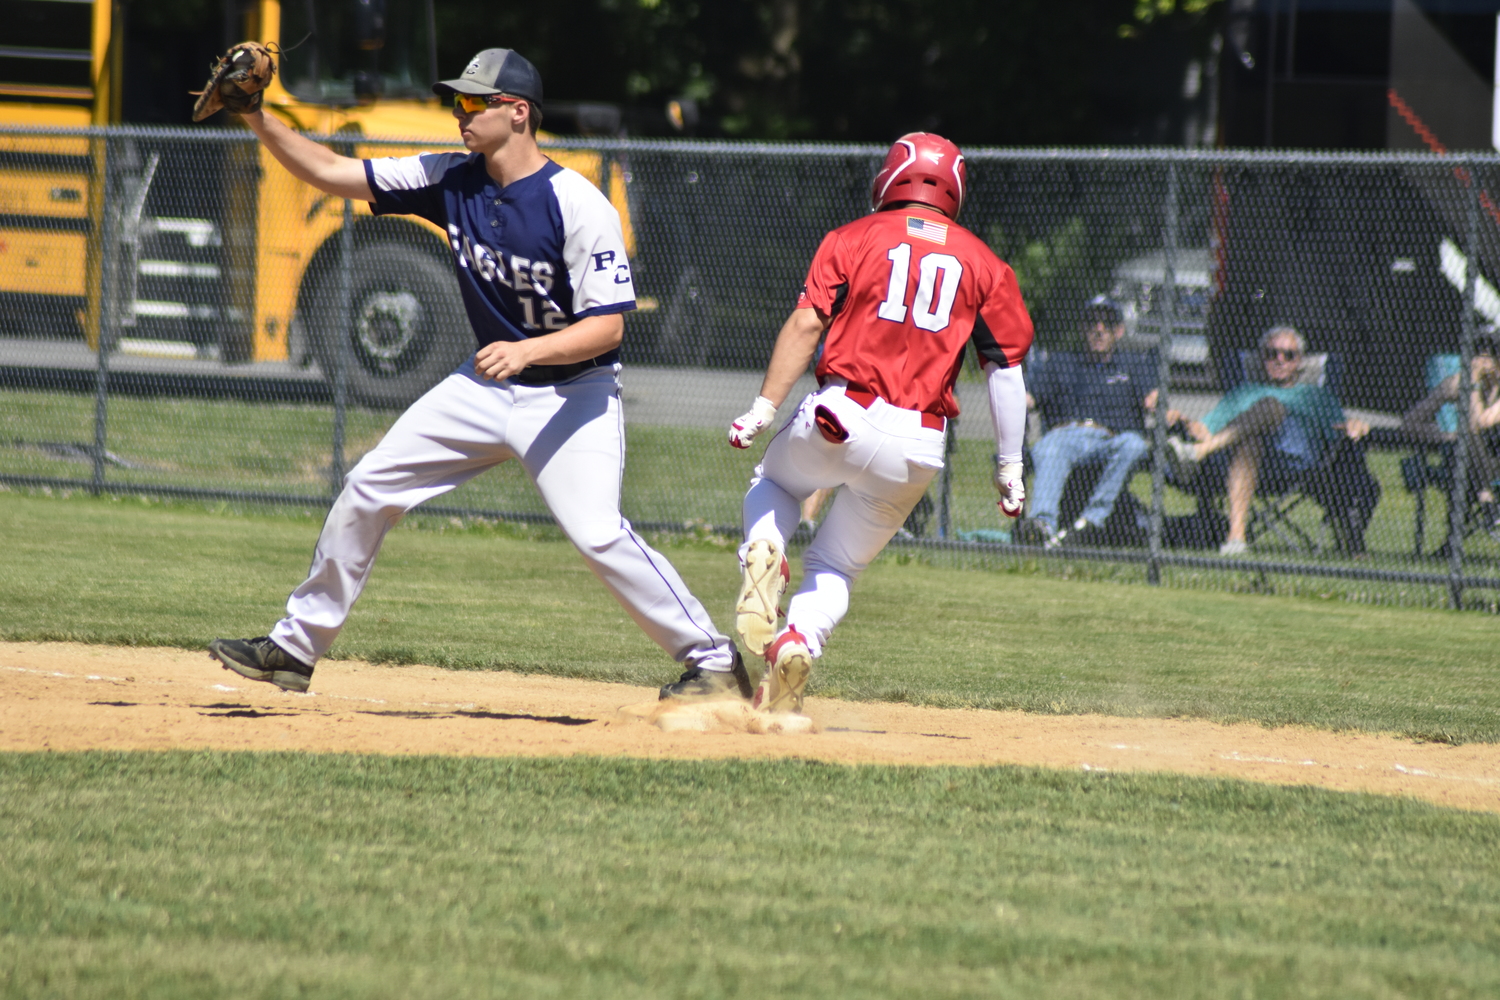 Max Krotman nearly beats out the throw at first base in the top of the seventh inning.  DREW BUDD